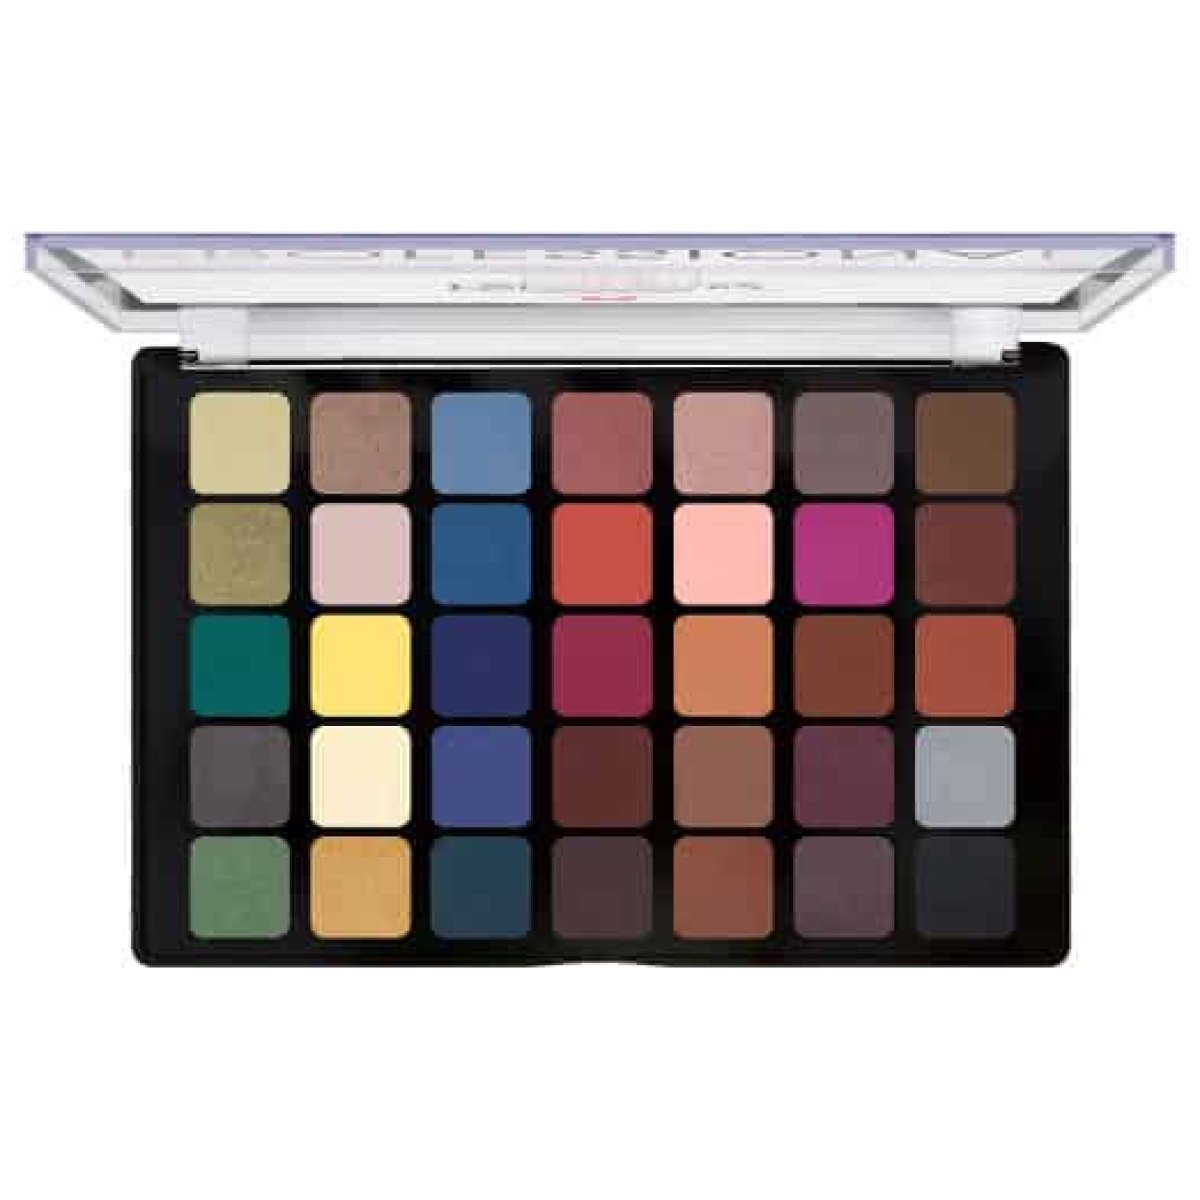 Daily Life Forever52 Ultimate Edition Eyeshadow Palette Uep003